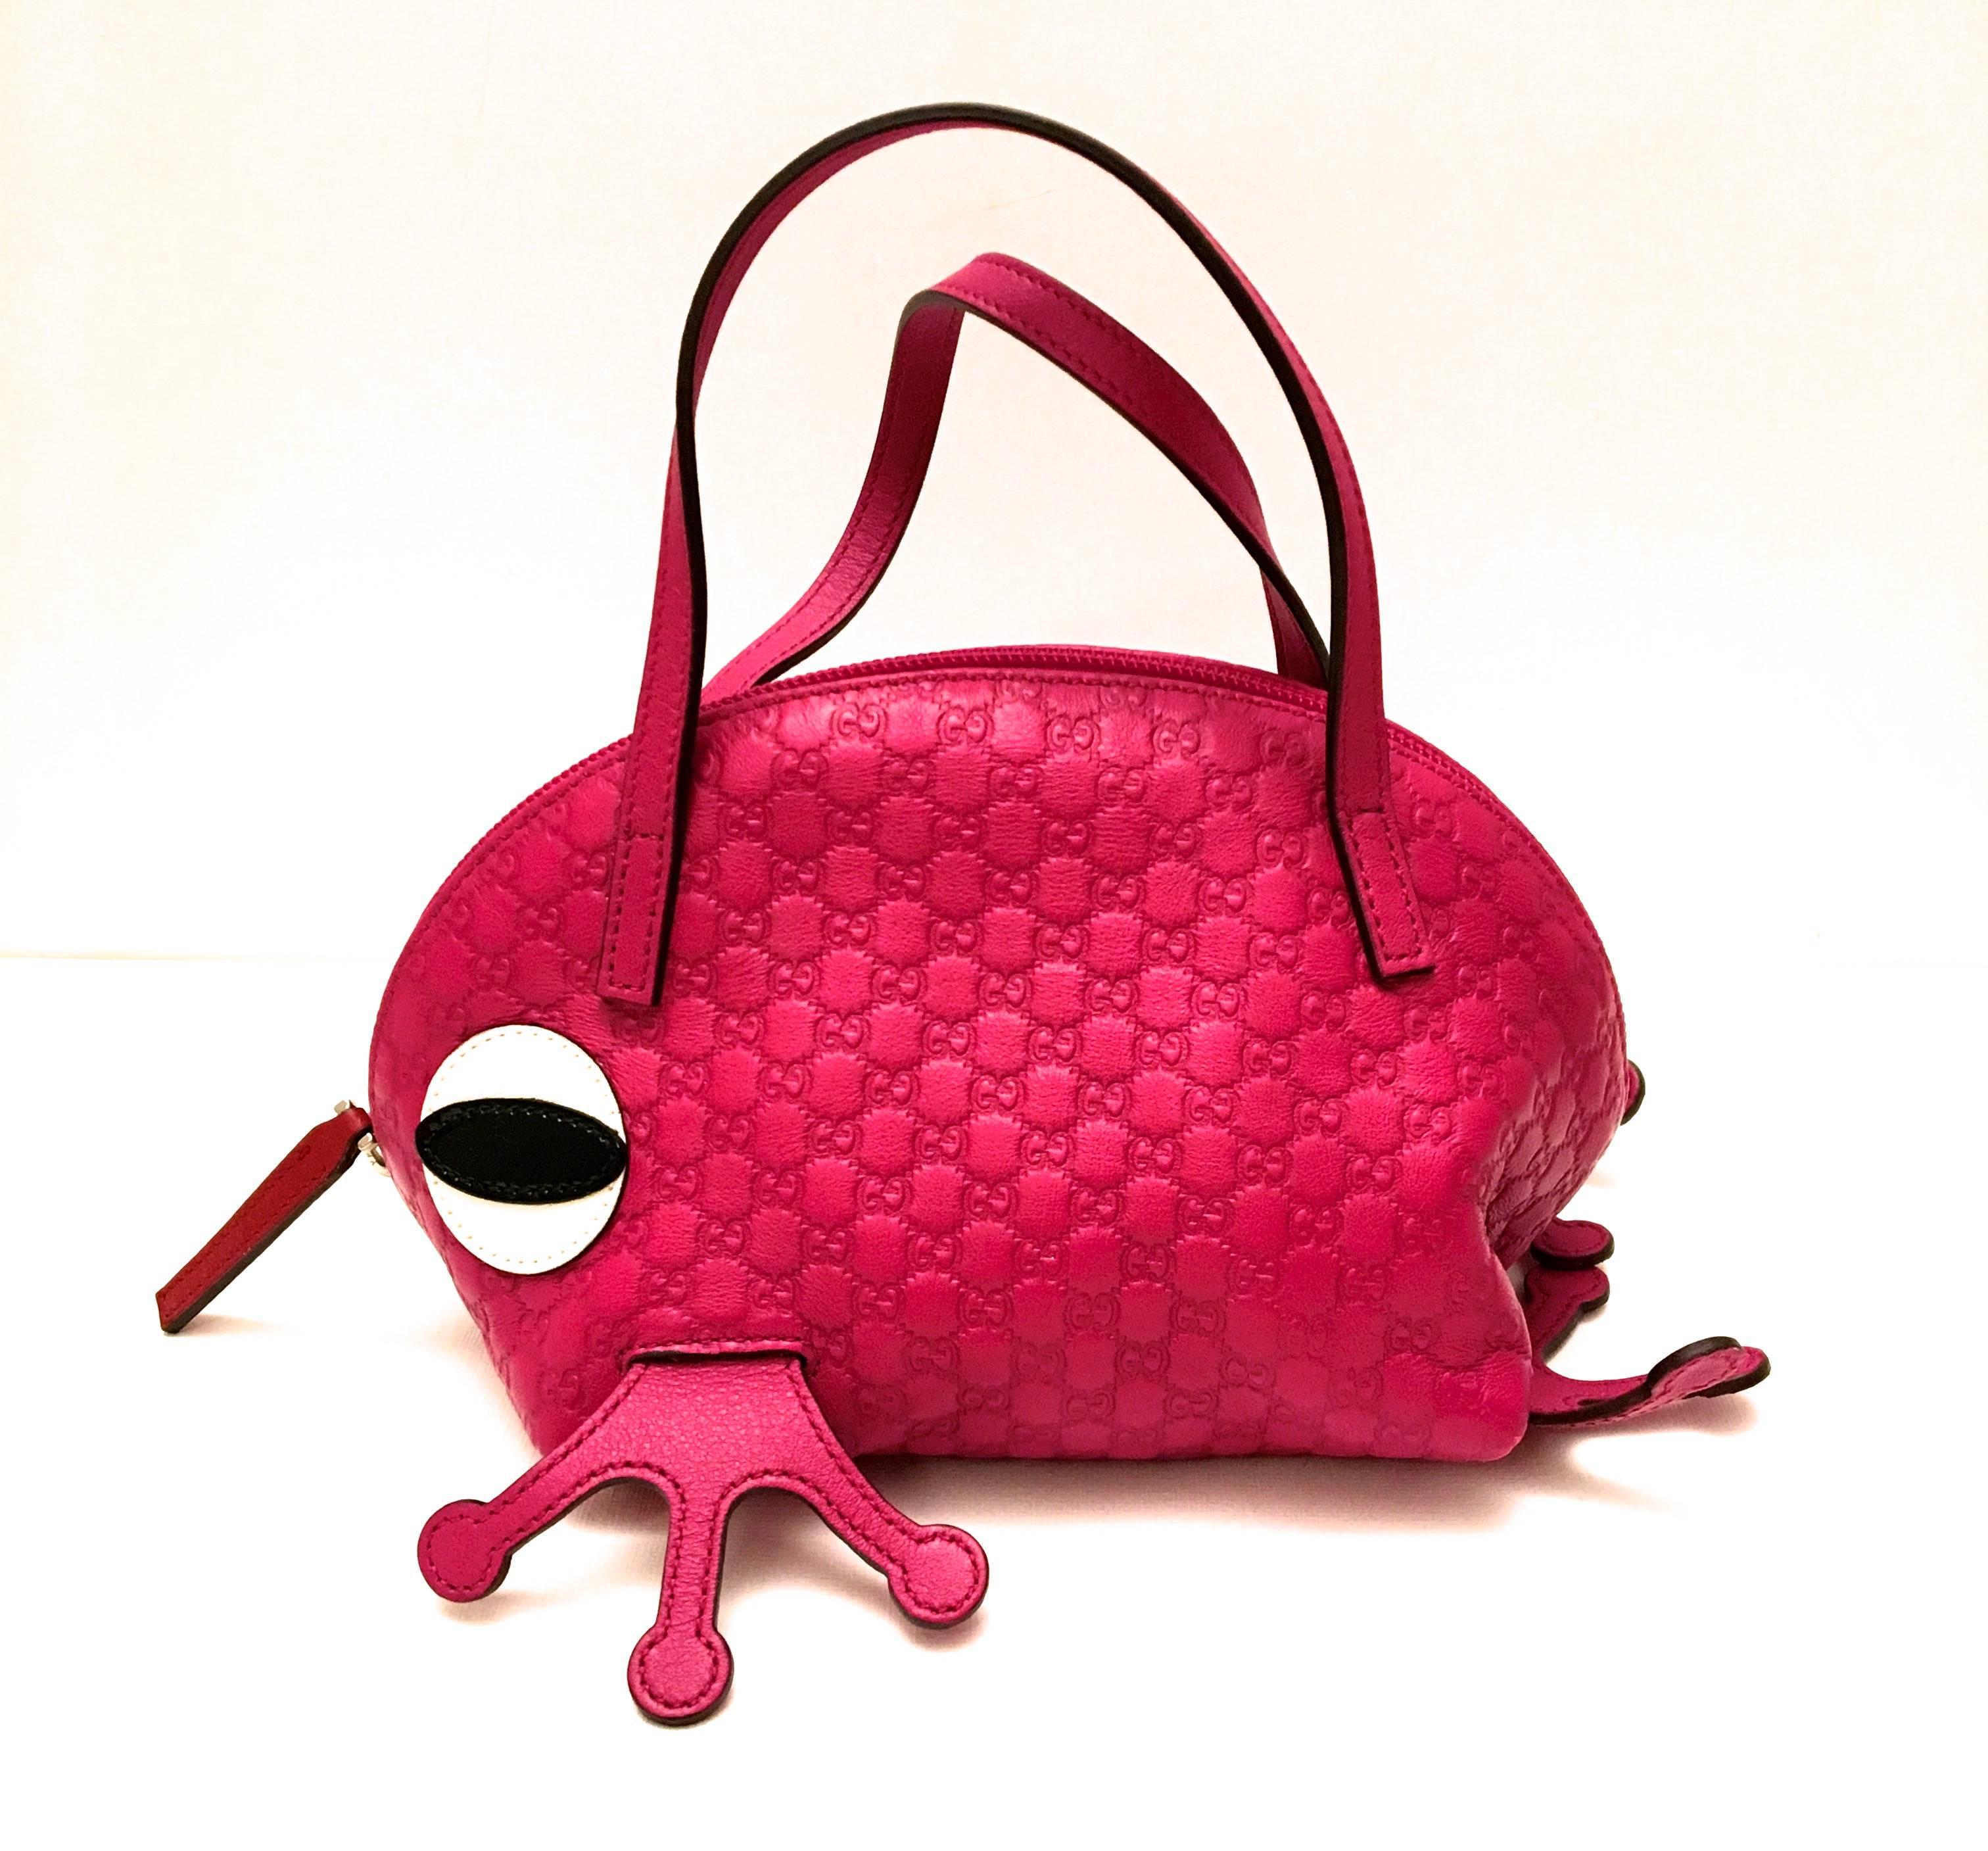 Presented here is an extremely rare and highly collectible limited edition Gucci leather miniature handbag. This adorable little top handle bag is comprised of a rich magenta leather with the signature Gucci logo imprinted across the soft grain